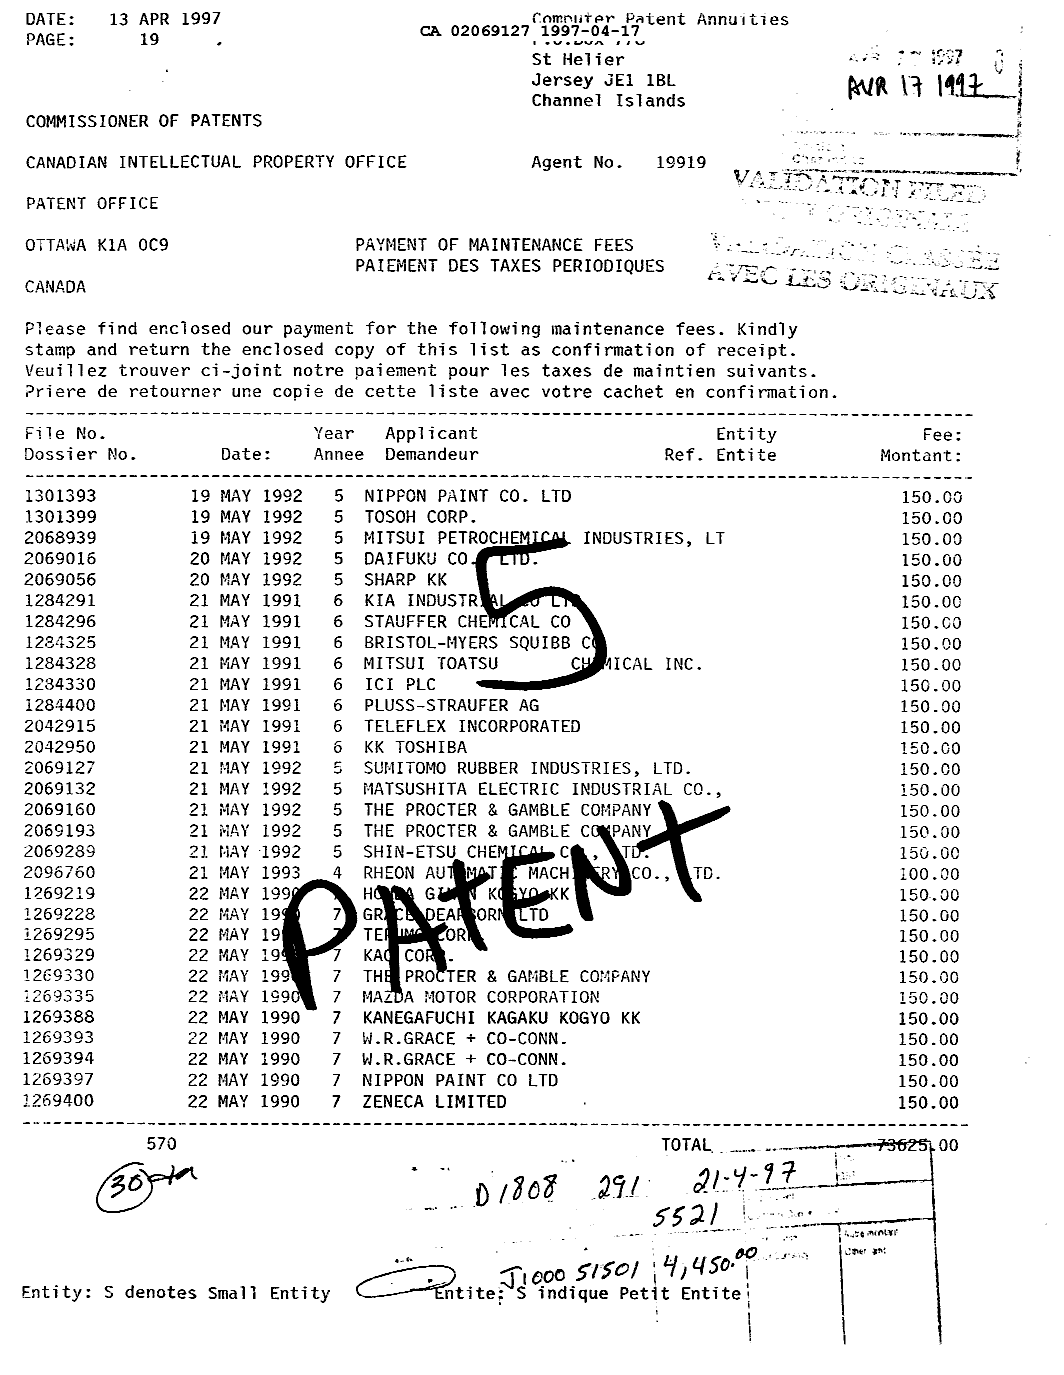 Canadian Patent Document 2069127. Fees 19961217. Image 1 of 1